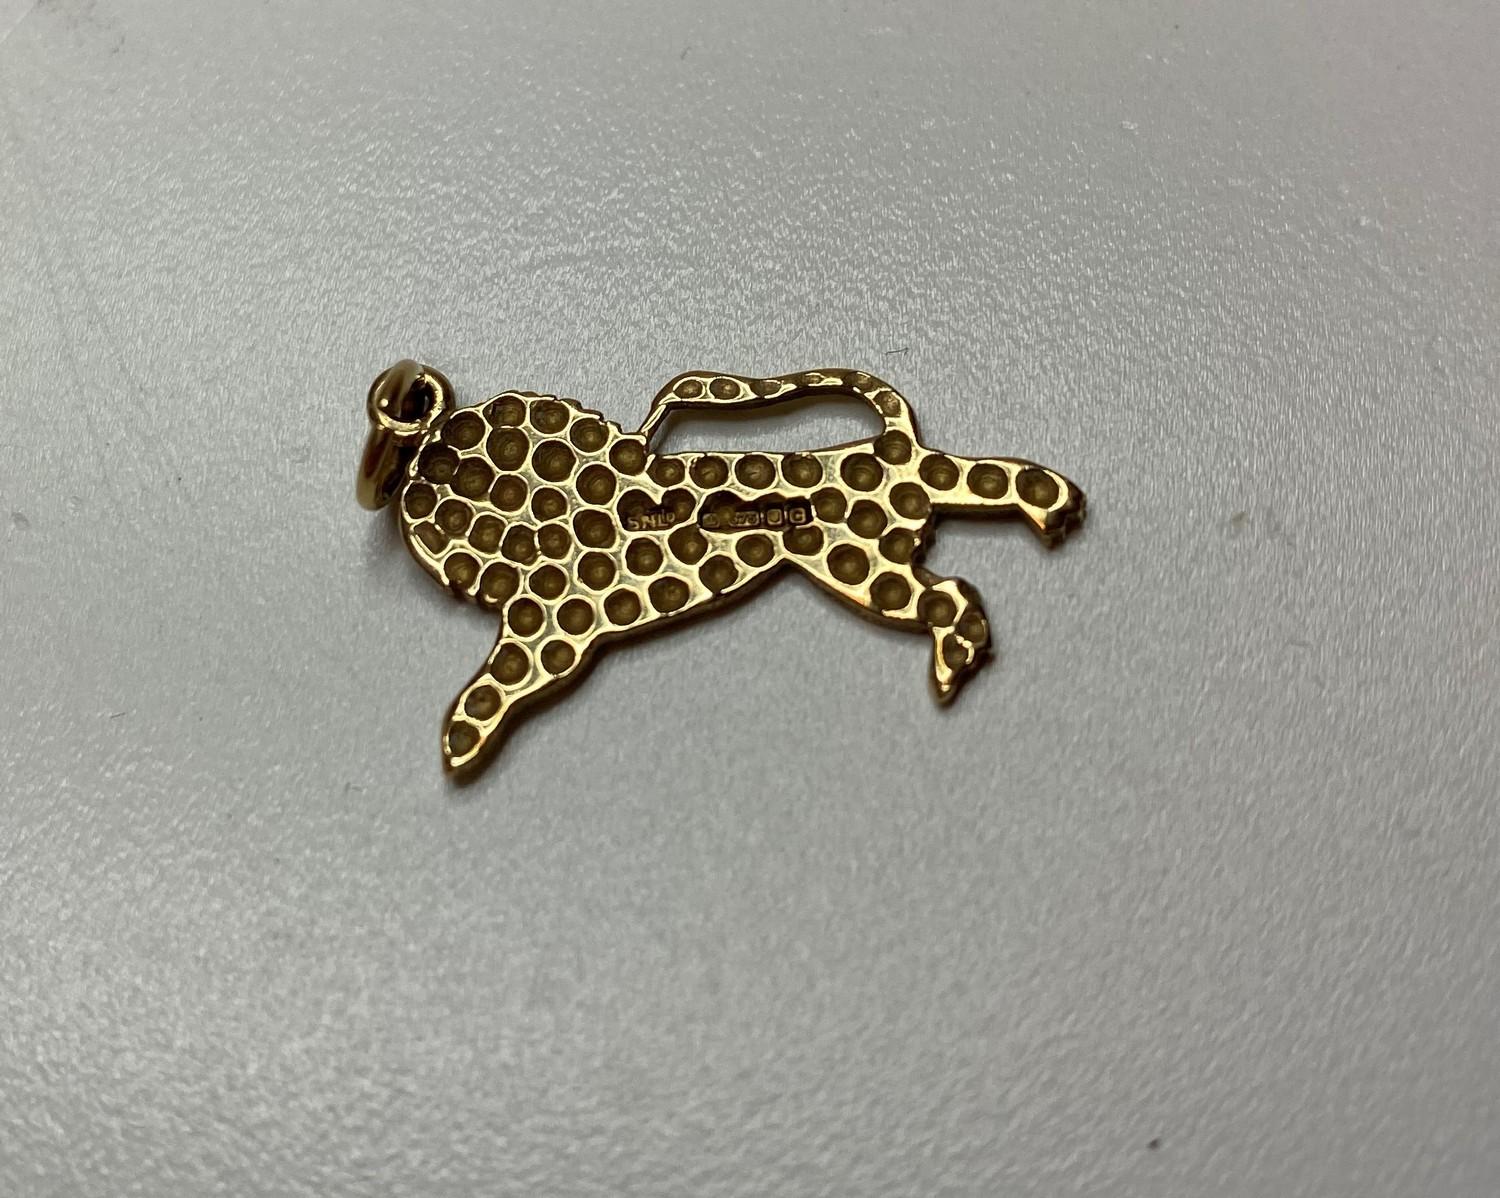 9CT Gold Lion Charm/Pendant, weight 2g approx - Image 3 of 3